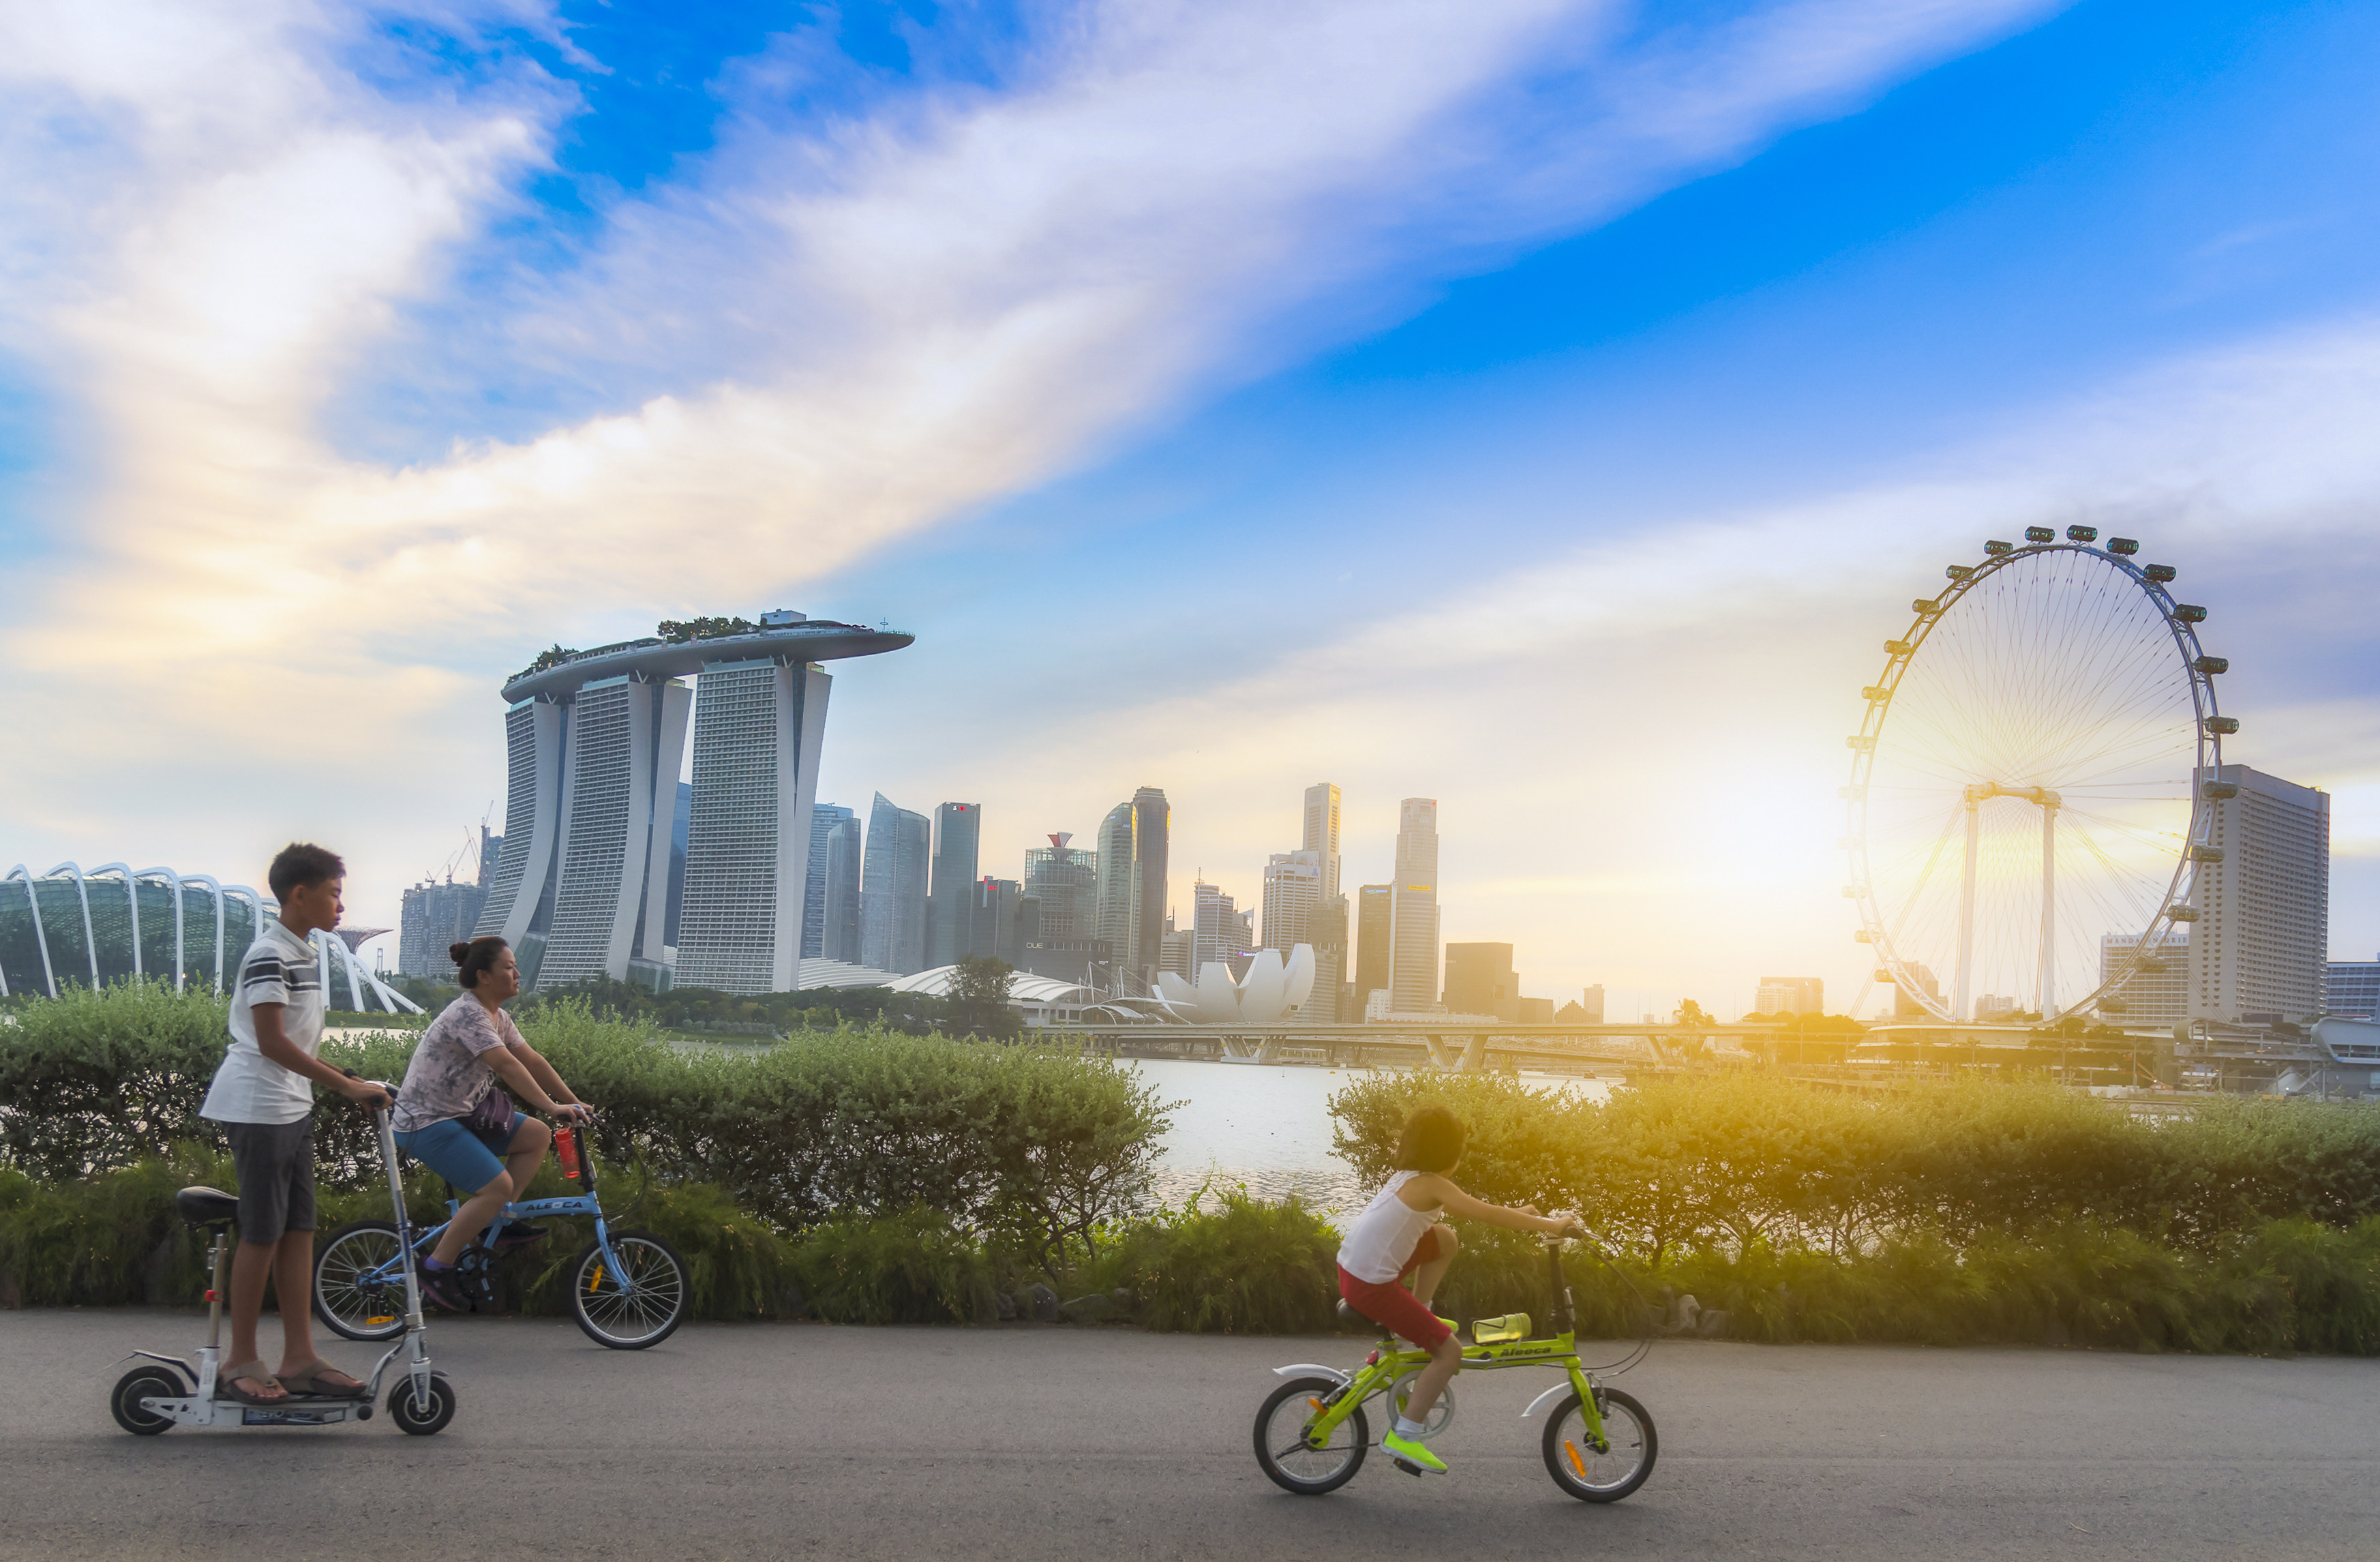 The Global Investor Programme gives permanent residency to those who qualify. Photo: Shutterstock